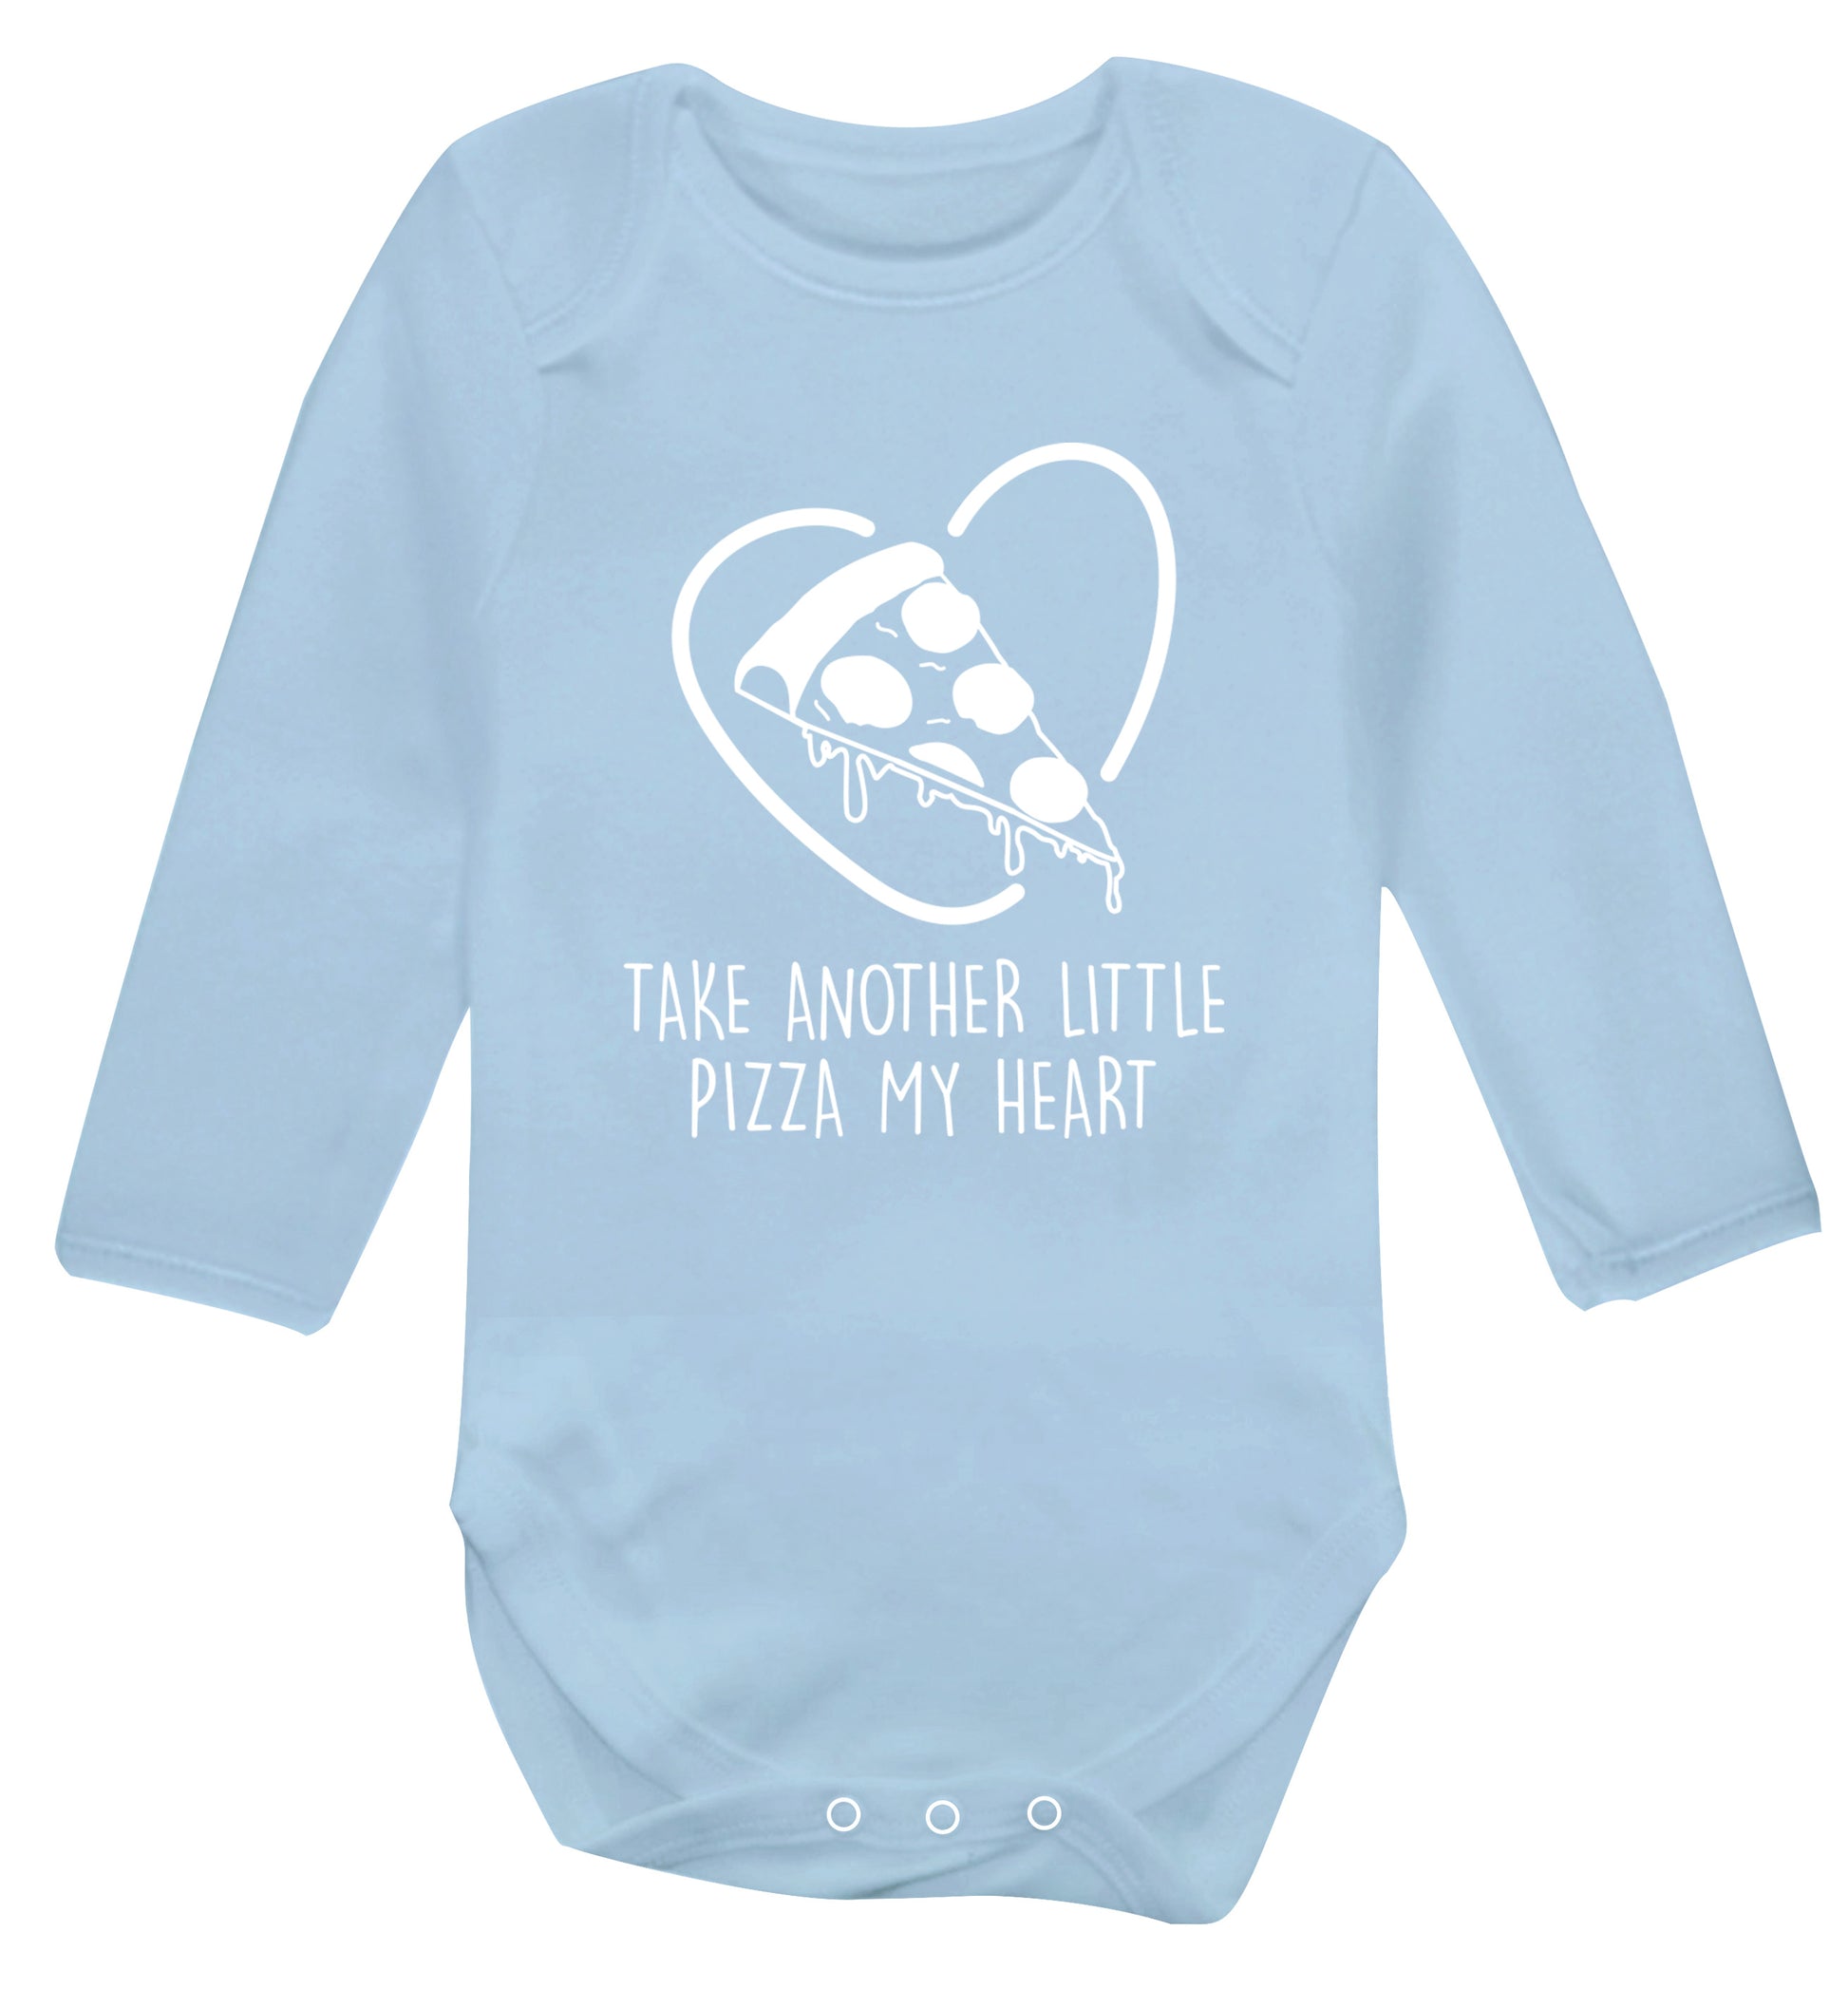 Take another little pizza my heart Baby Vest long sleeved pale blue 6-12 months